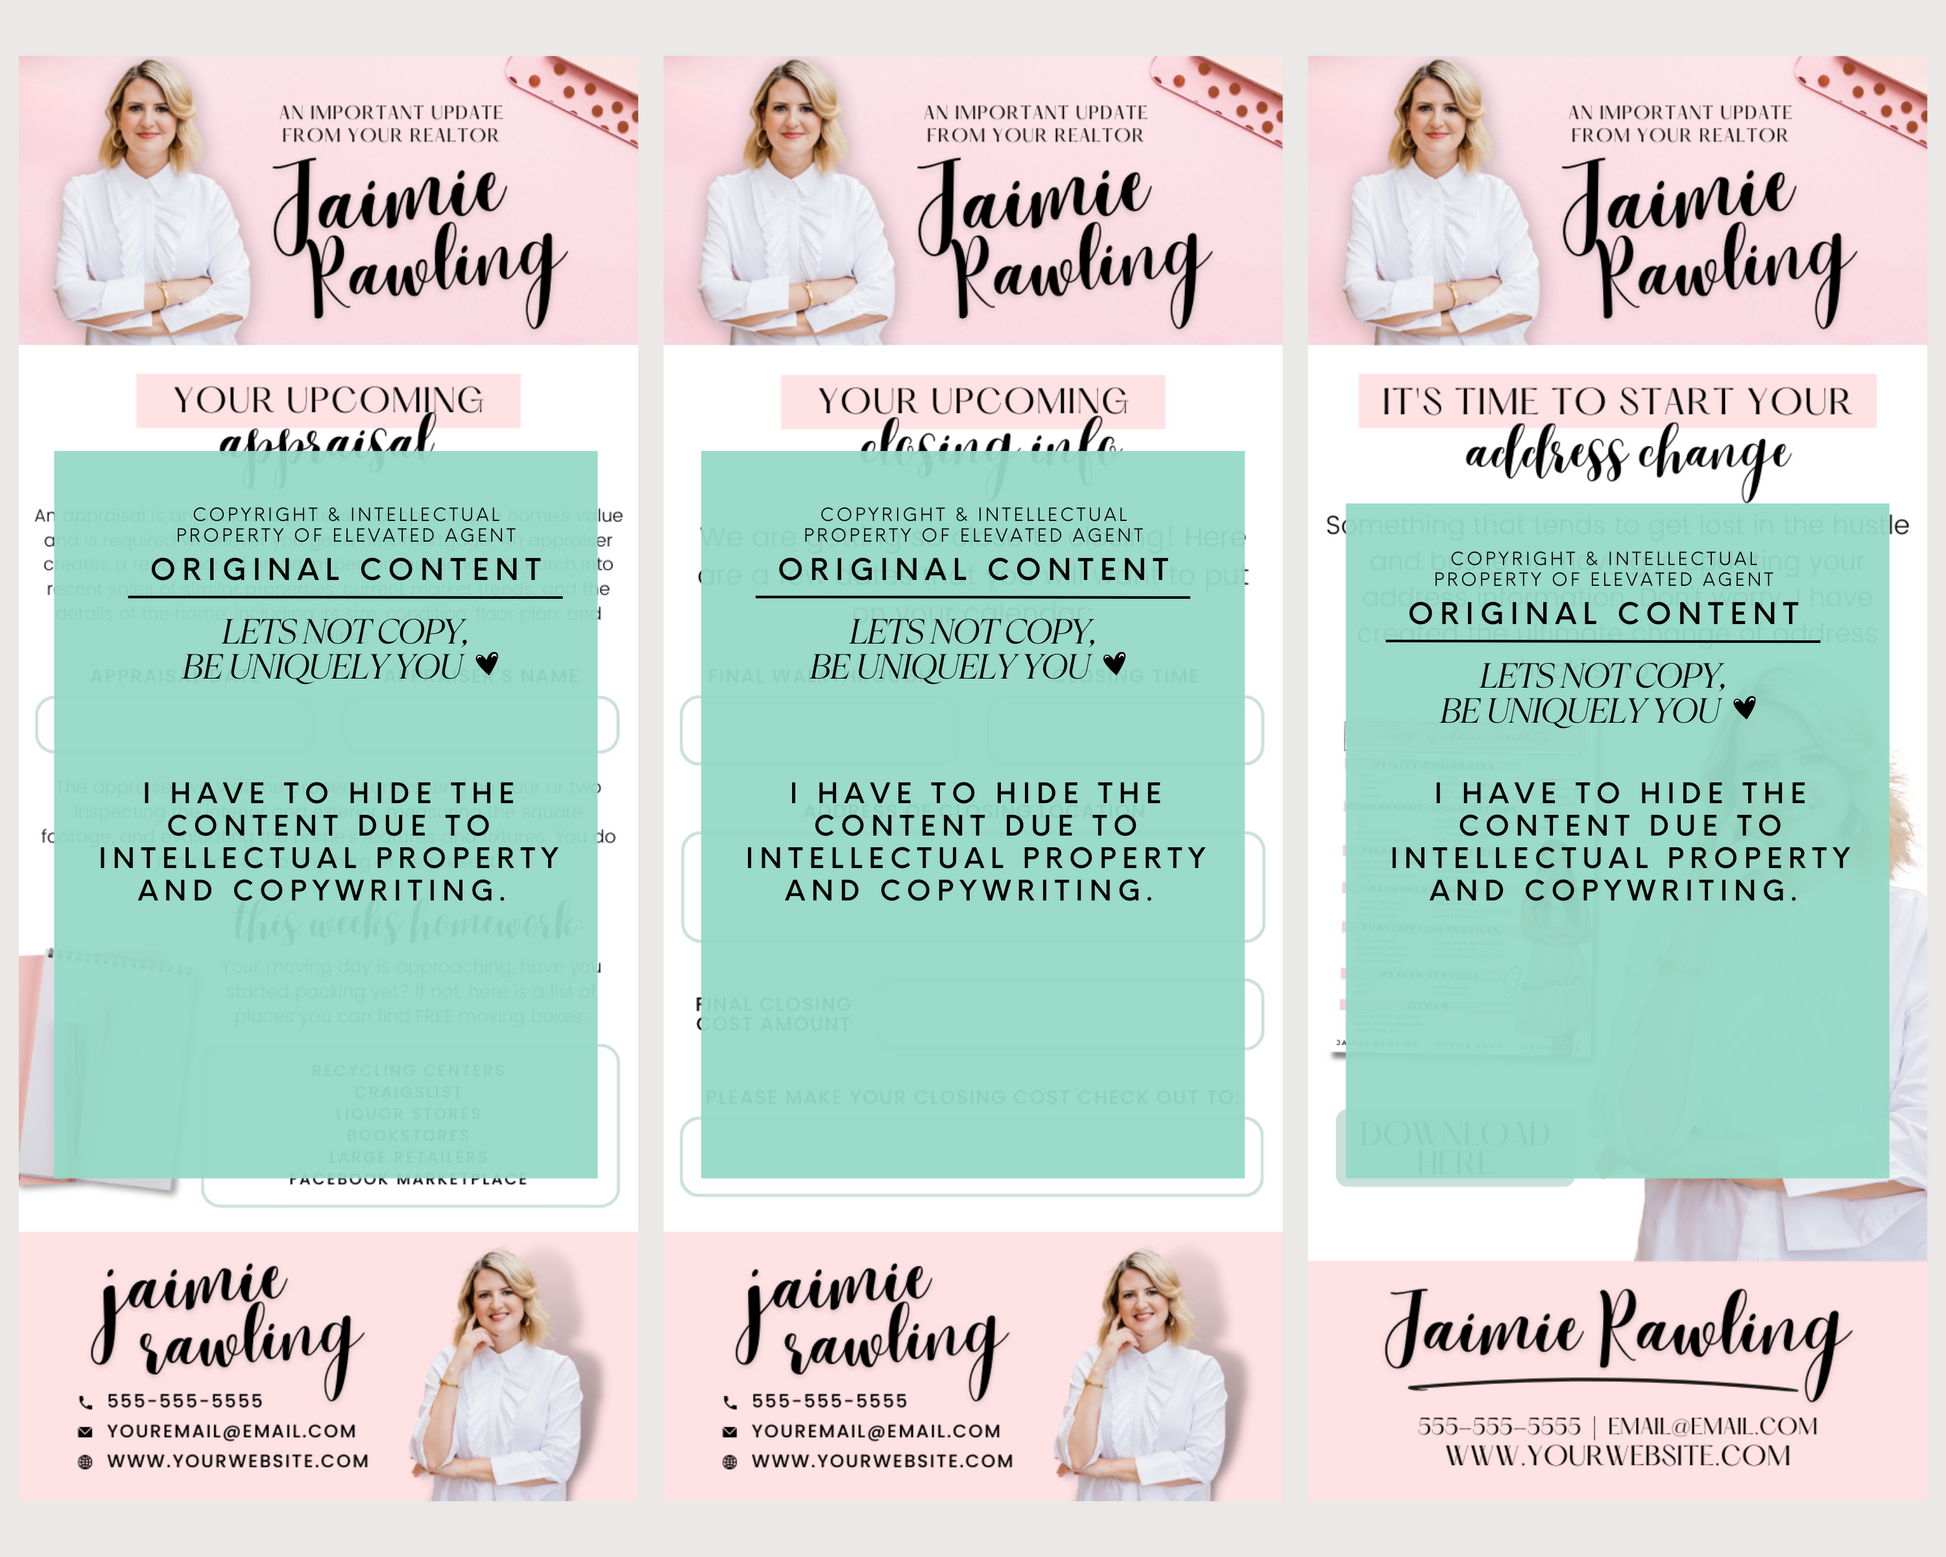 Canva Email Templates